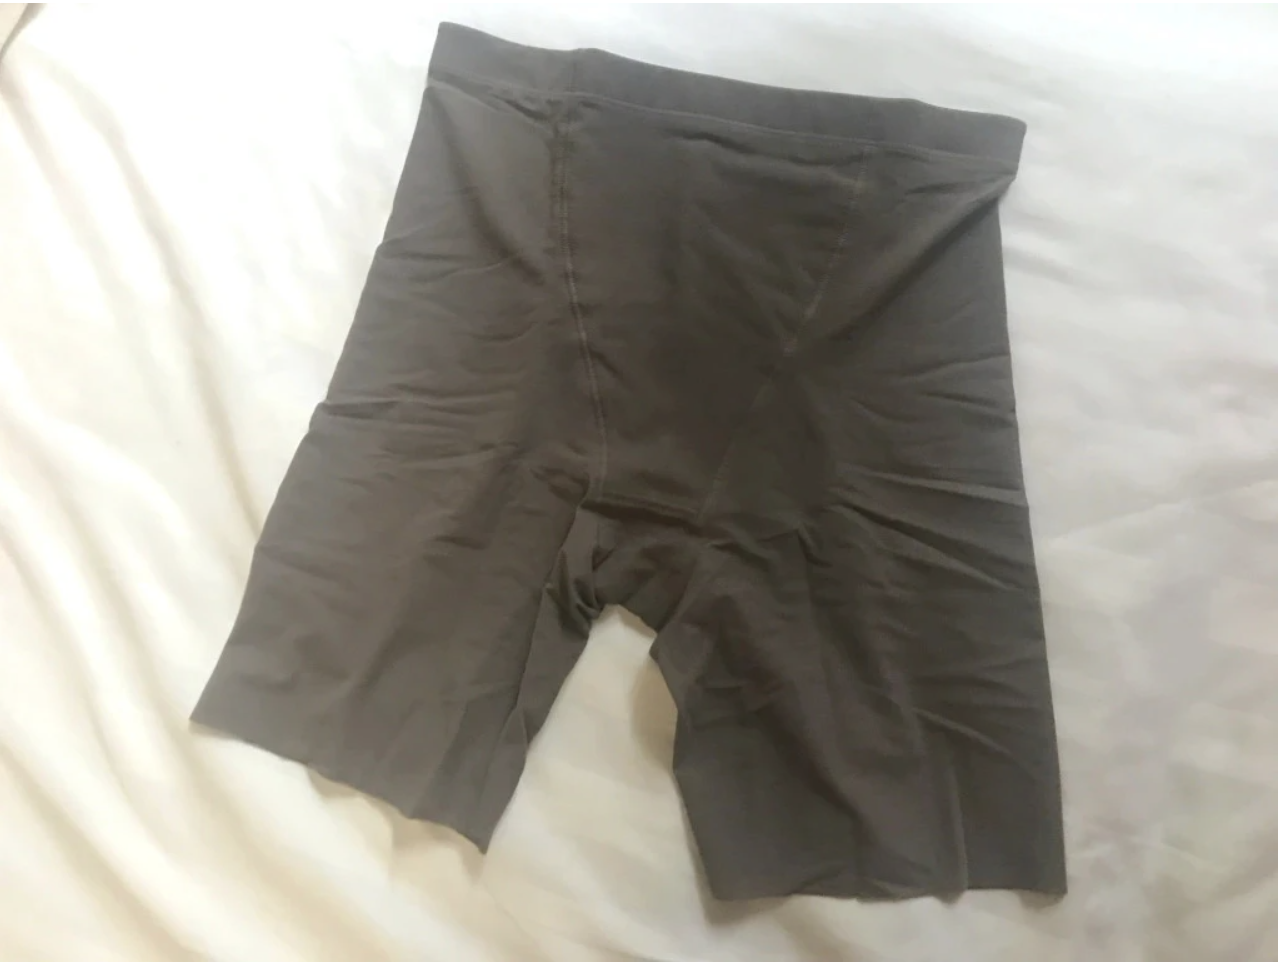 Shaping underwear from Uniqlo better than a diet and only costs ¥990 -  Japan Today